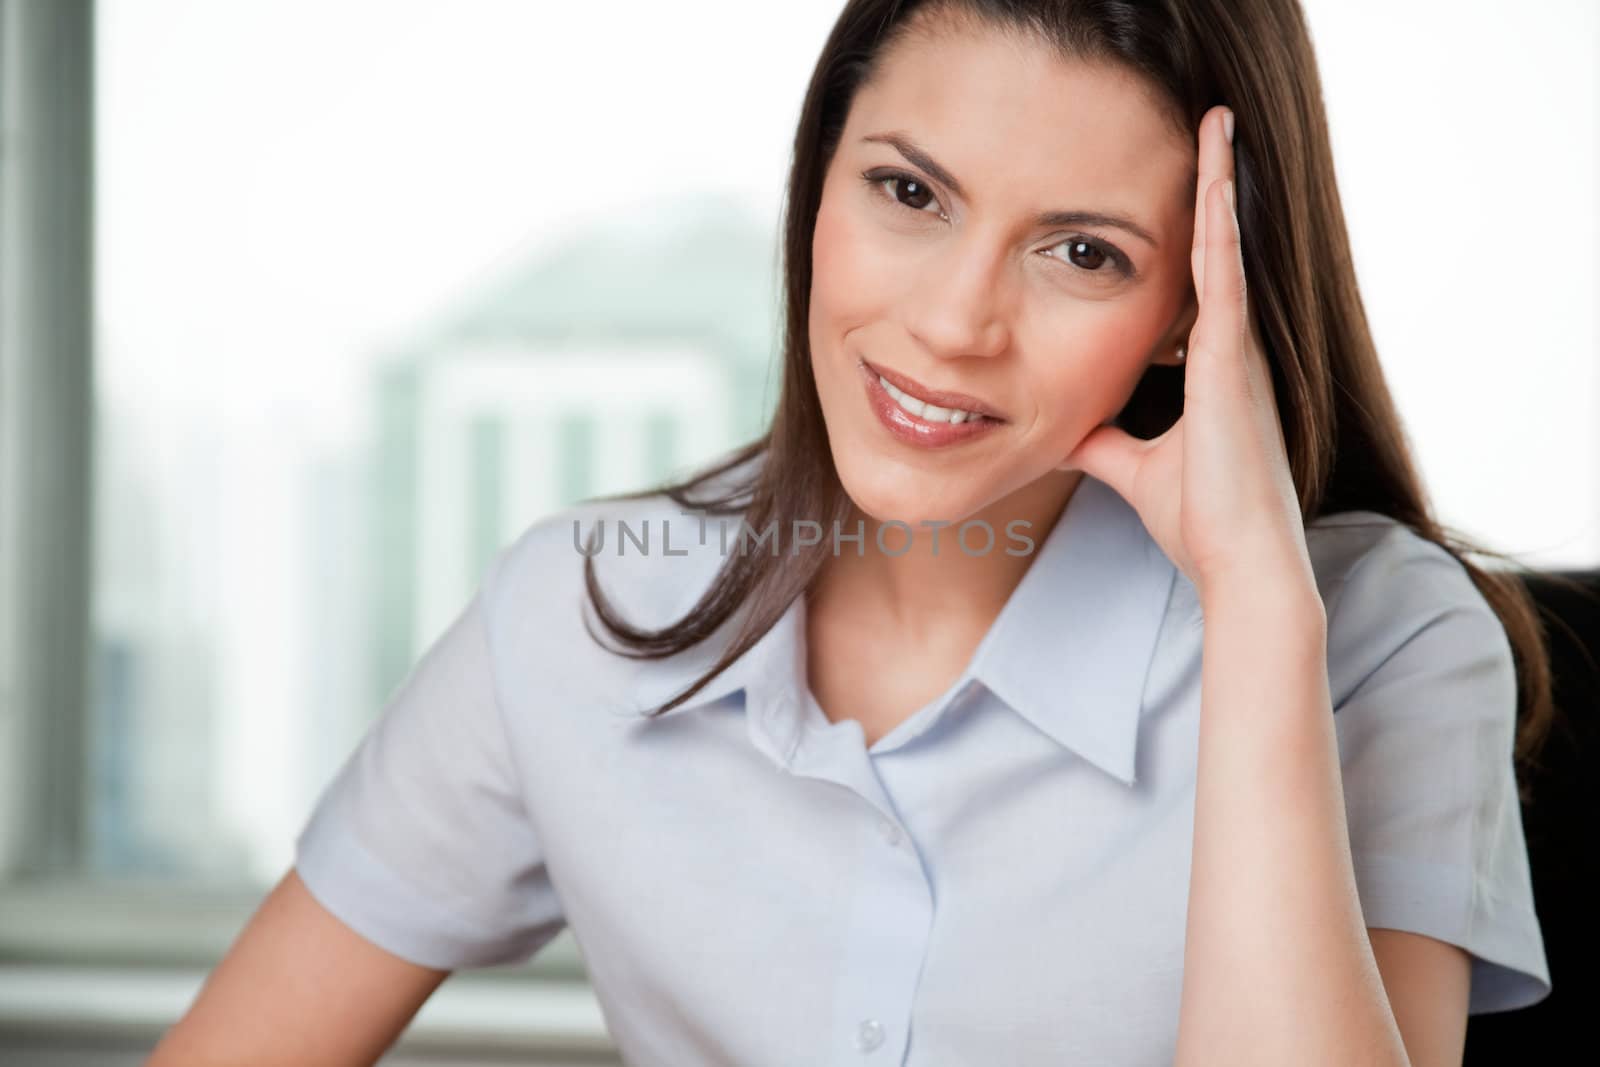 Portrait Of Young Smiling Business Woman With Hand On Head.